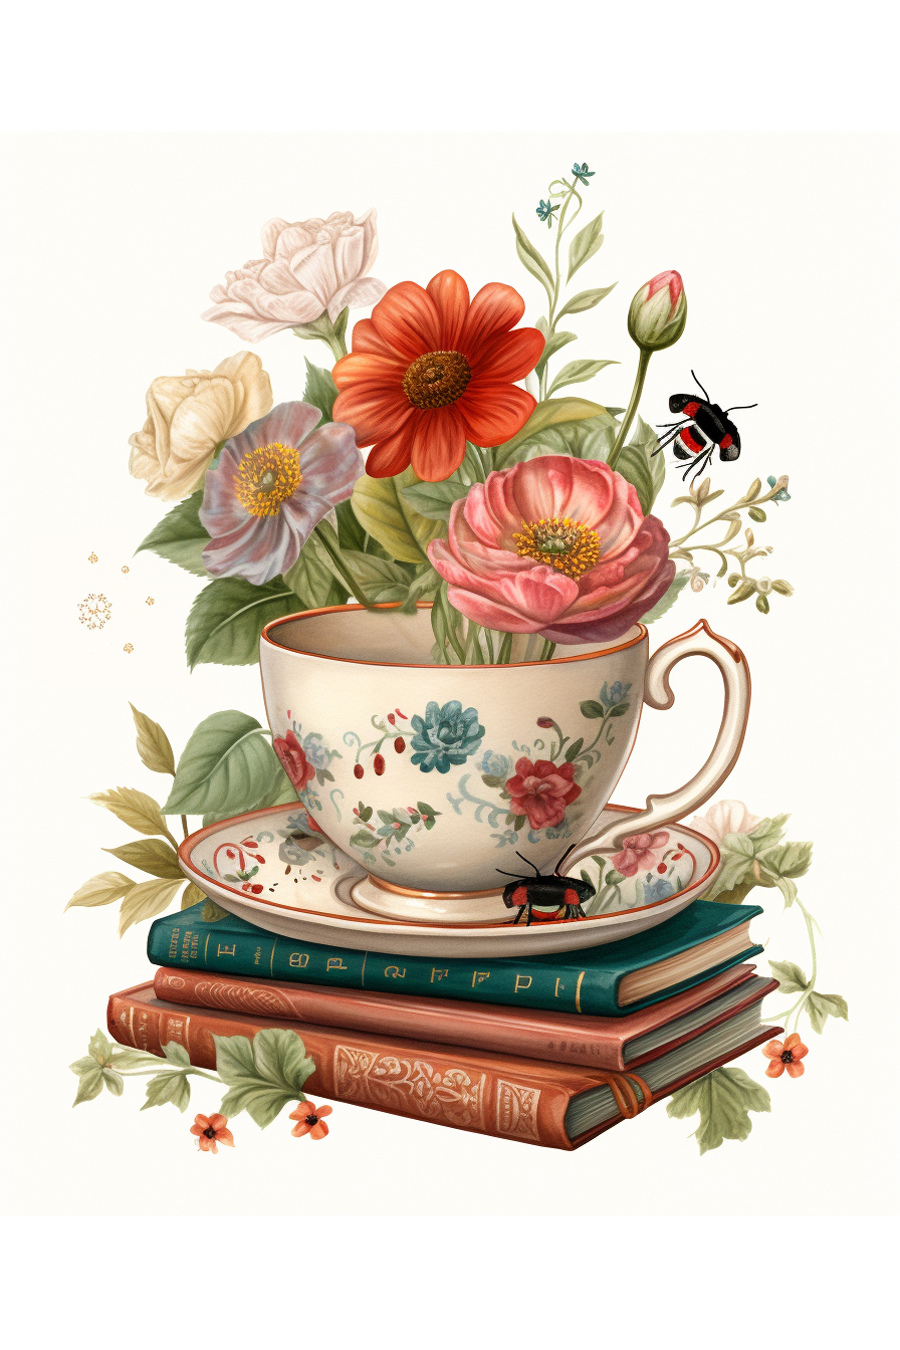 A tea cup with flowers on top of books.